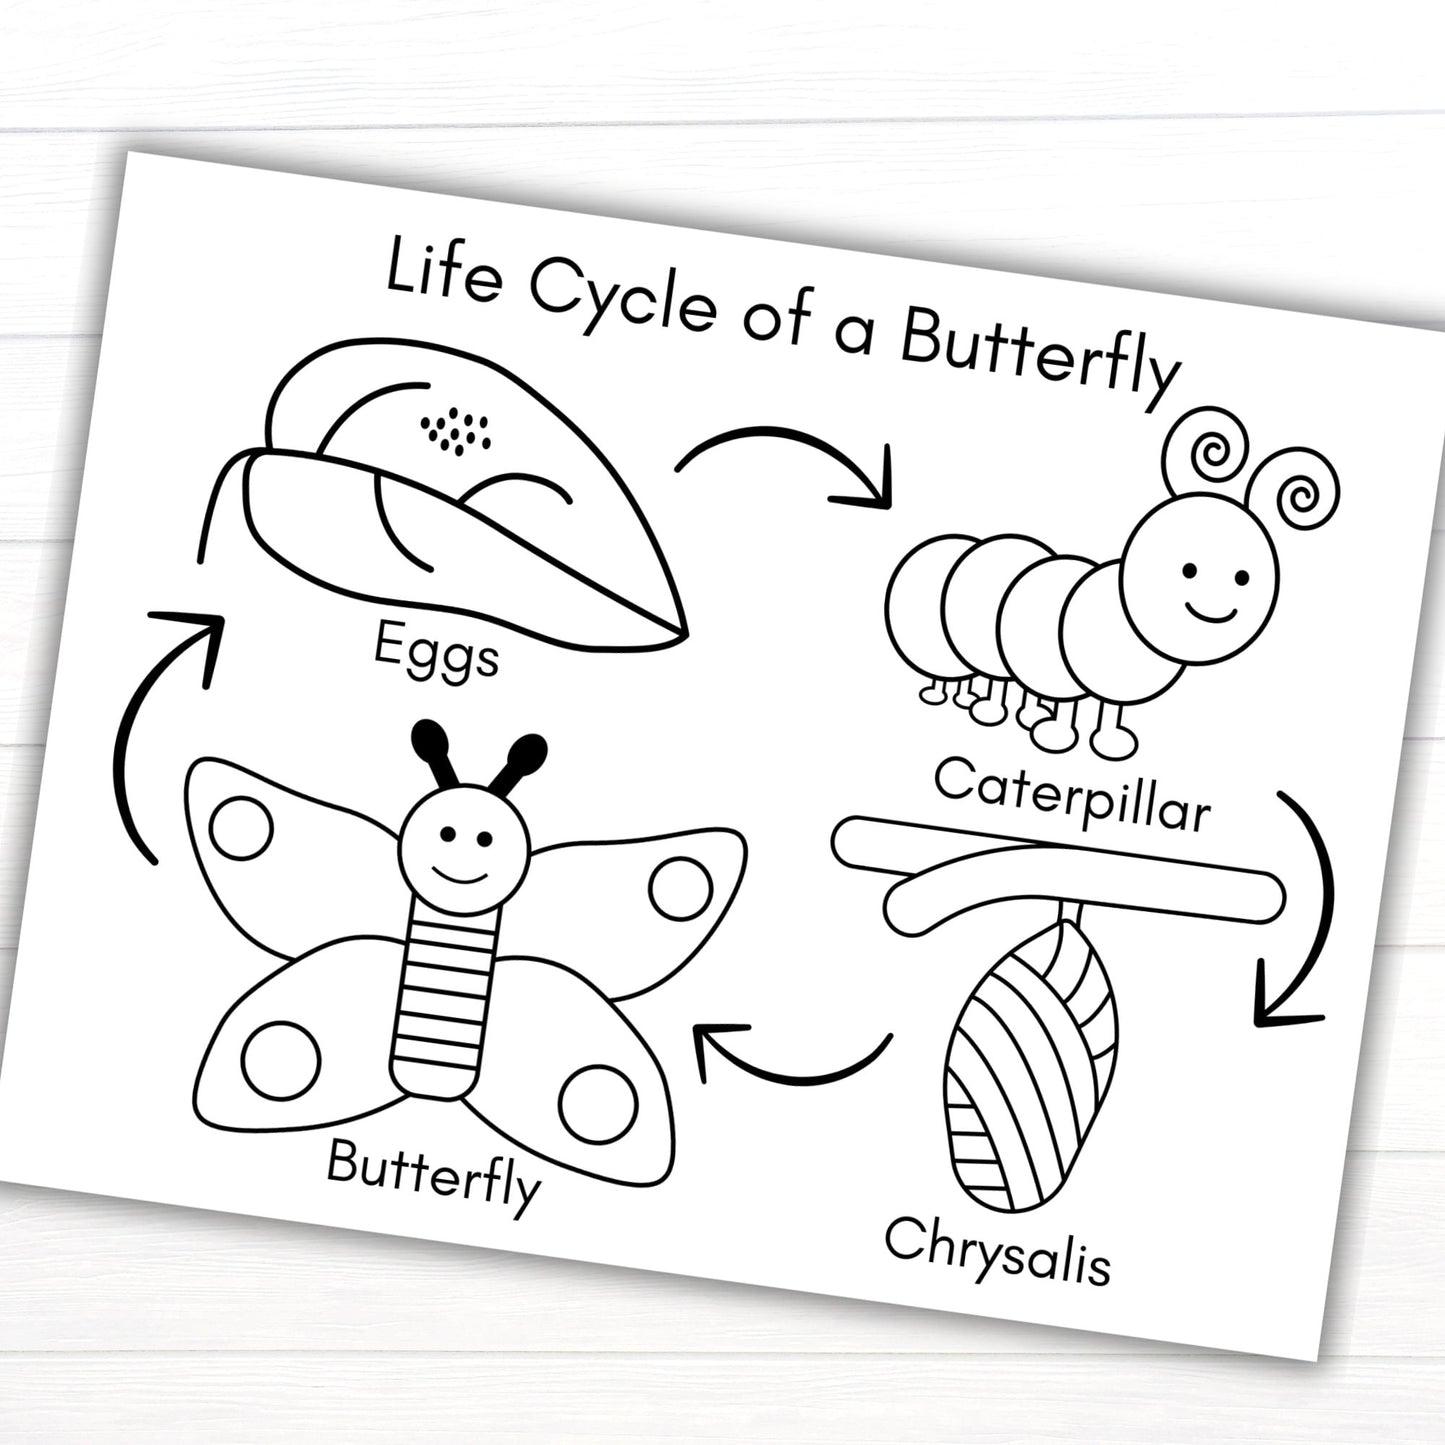 Butterfly Life Cycle Coloring Page, Printable Life Cycle of a Butterfly Activities, Life Cycles, Butterfly Activities, Butterfly Printables